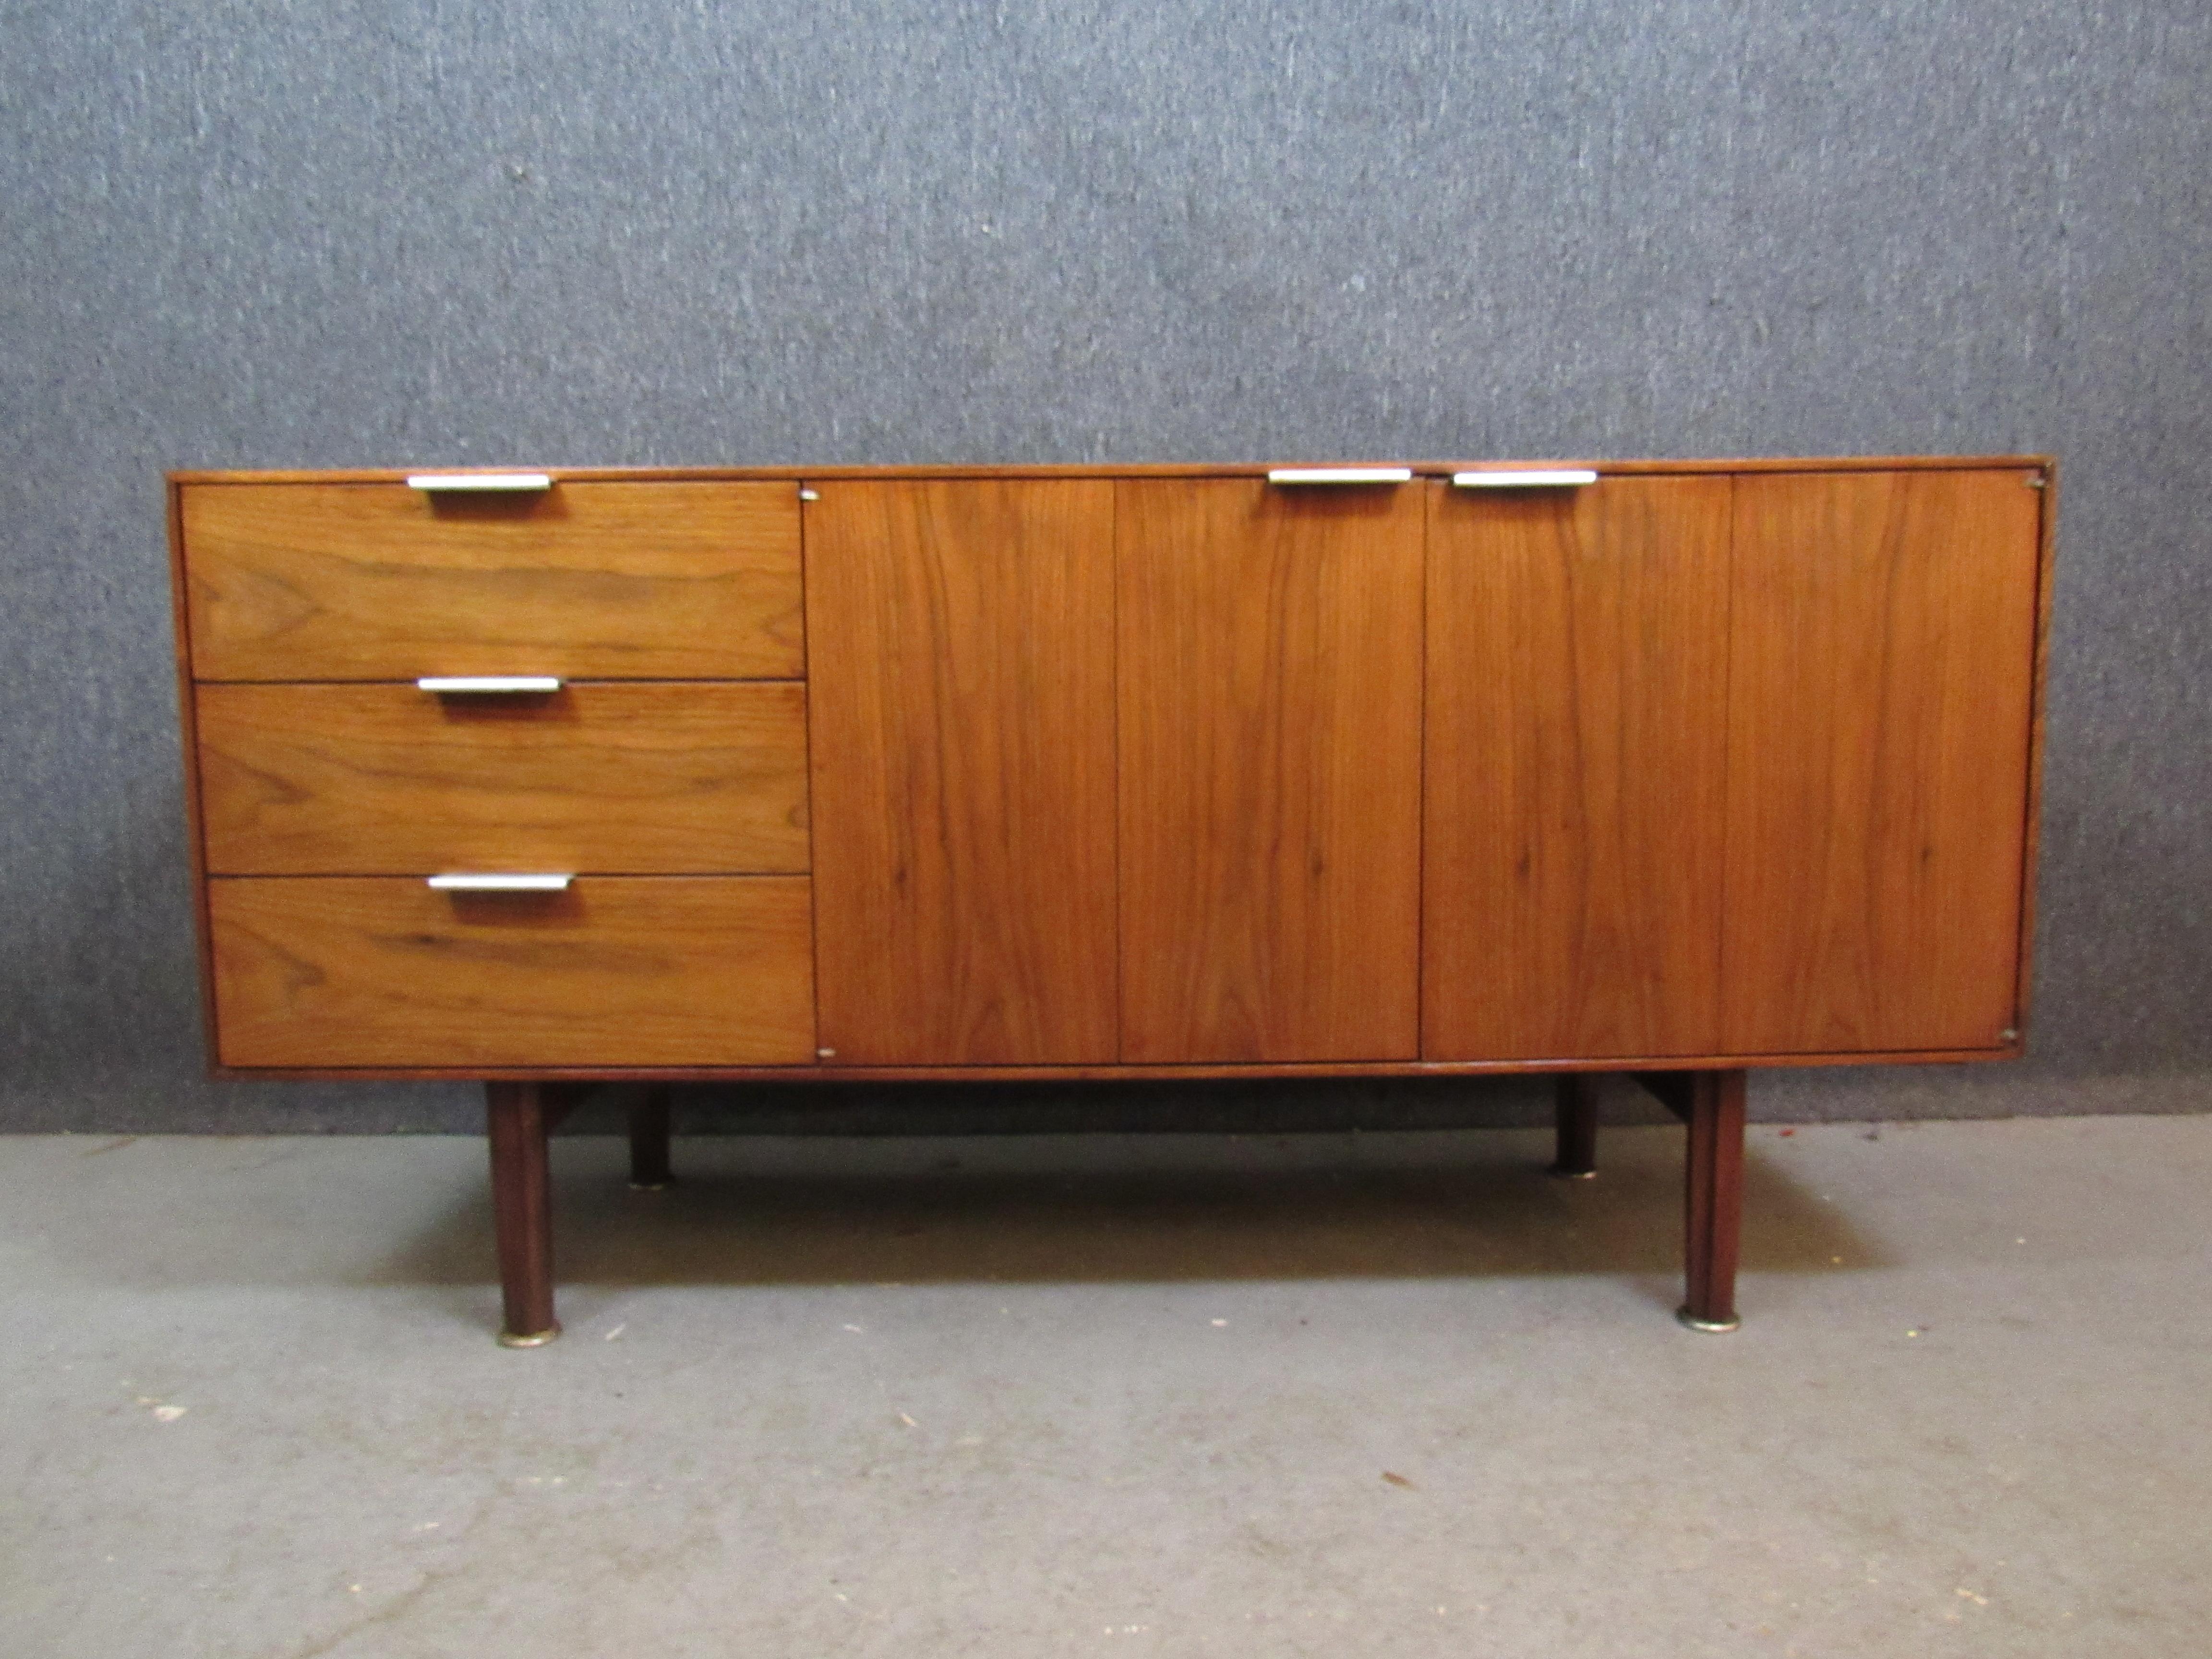 Wonderful compact vintage sideboard from Michigan's John Stuart Inc. of Grand Rapids.  Three pull-out drawers alongside a pair of folding double doors offer plenty of storage space, whether in the home or office. A gorgeous natural wood grain has